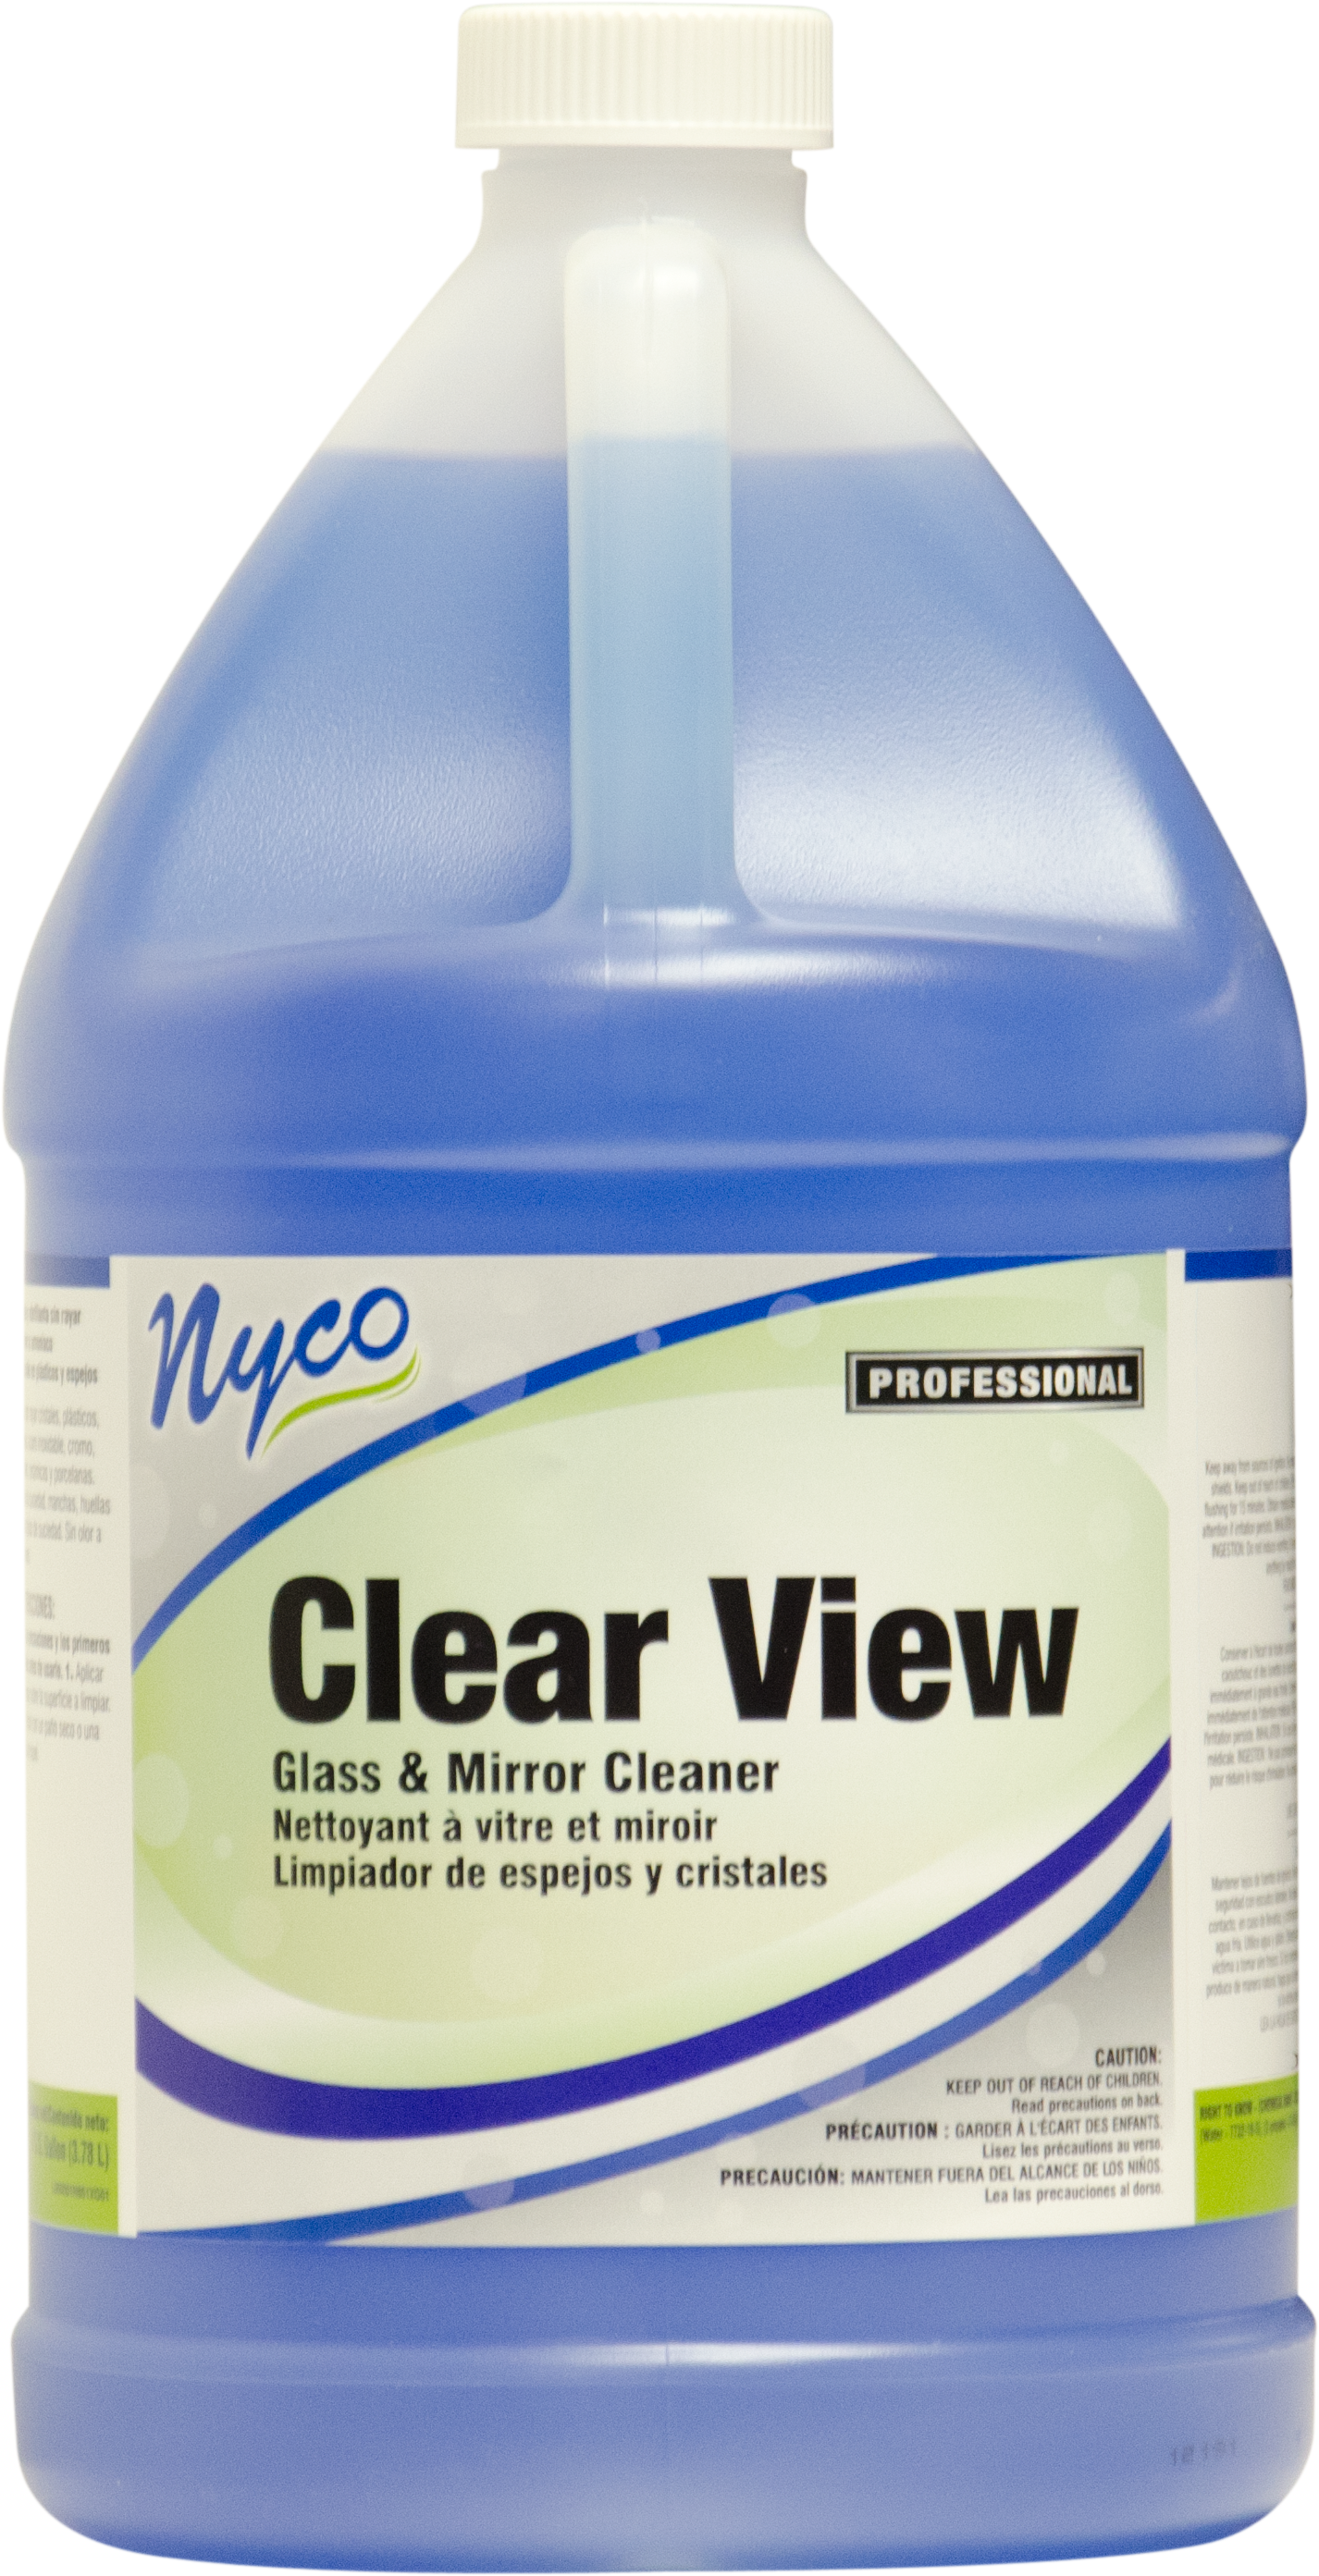 Clear View - Nyco Products Company